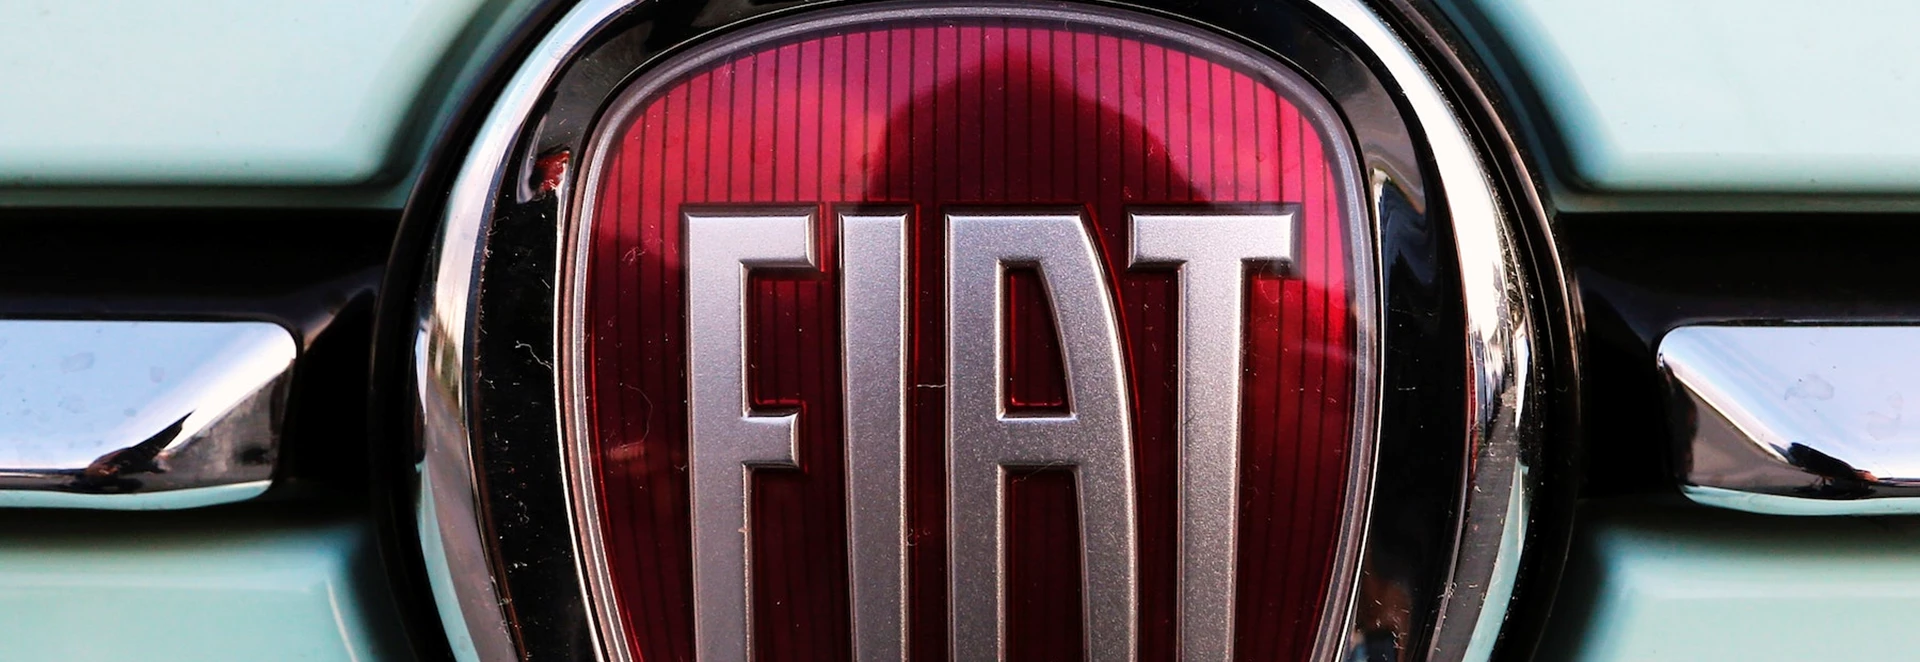 PSA Group confirms merger with Fiat Chrysler (1) 